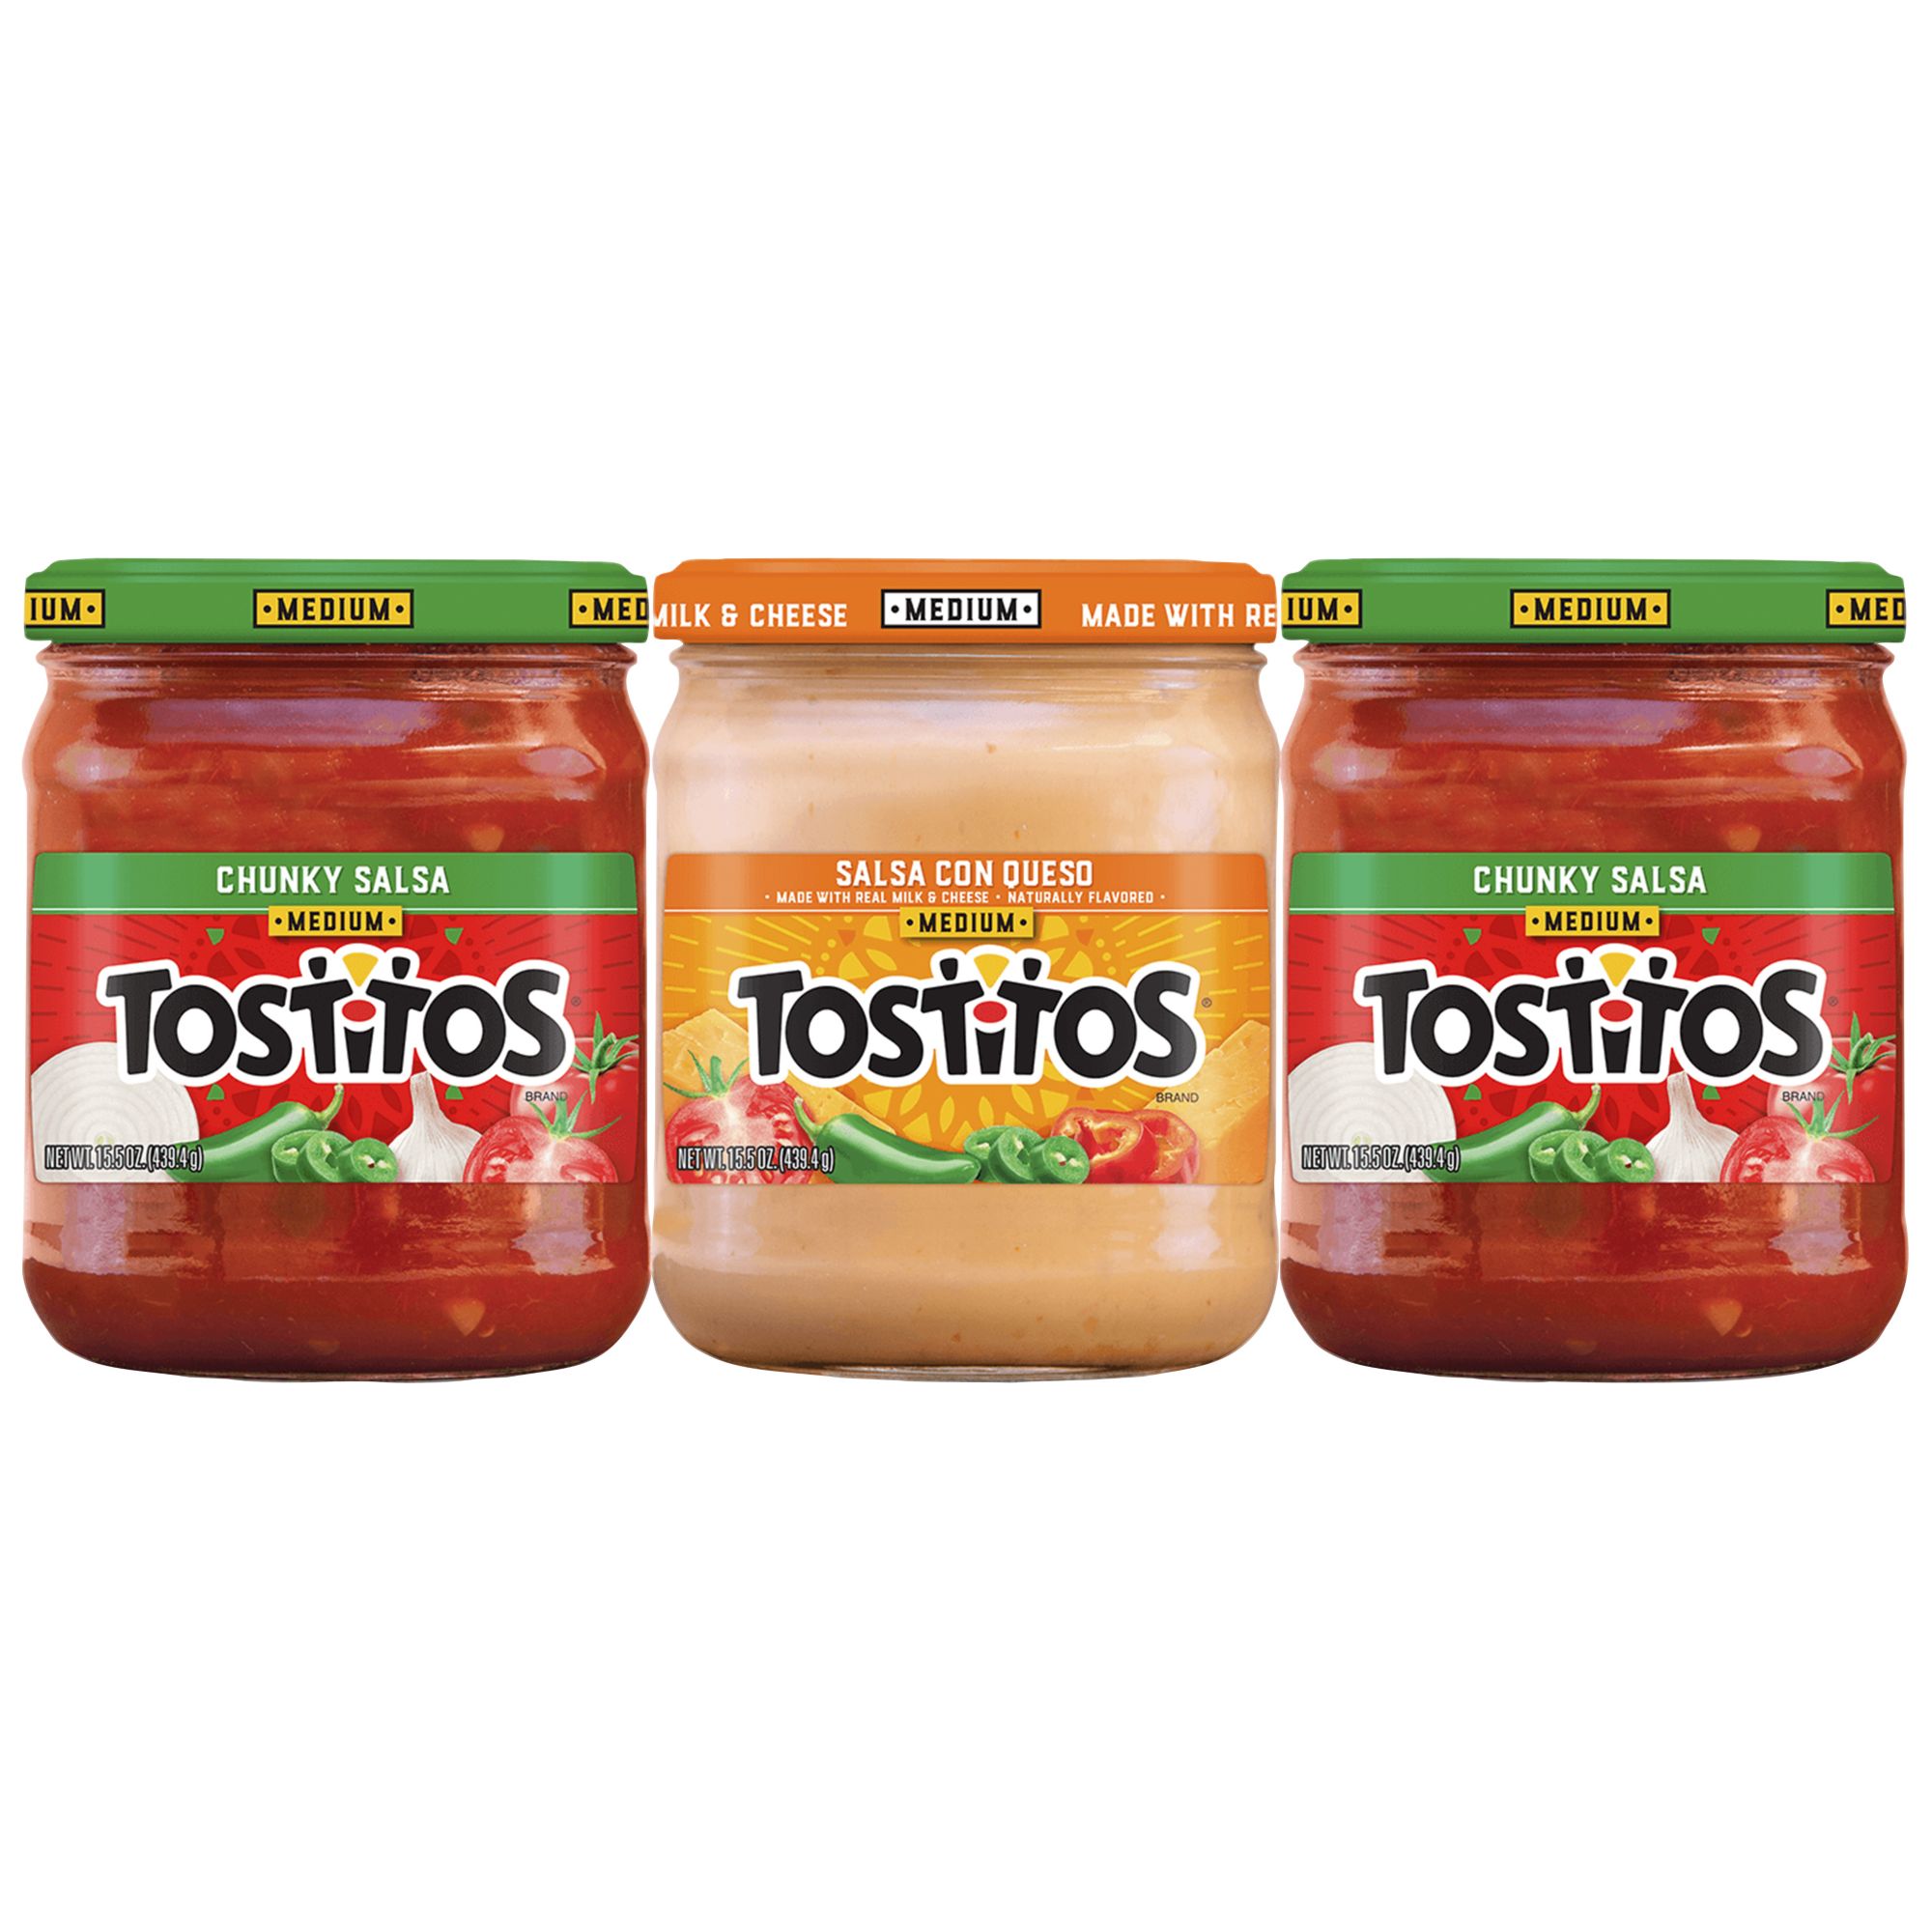 Frito-Lay Restaurant Style Salsa/Queso Dip | BJ's Wholesale Club